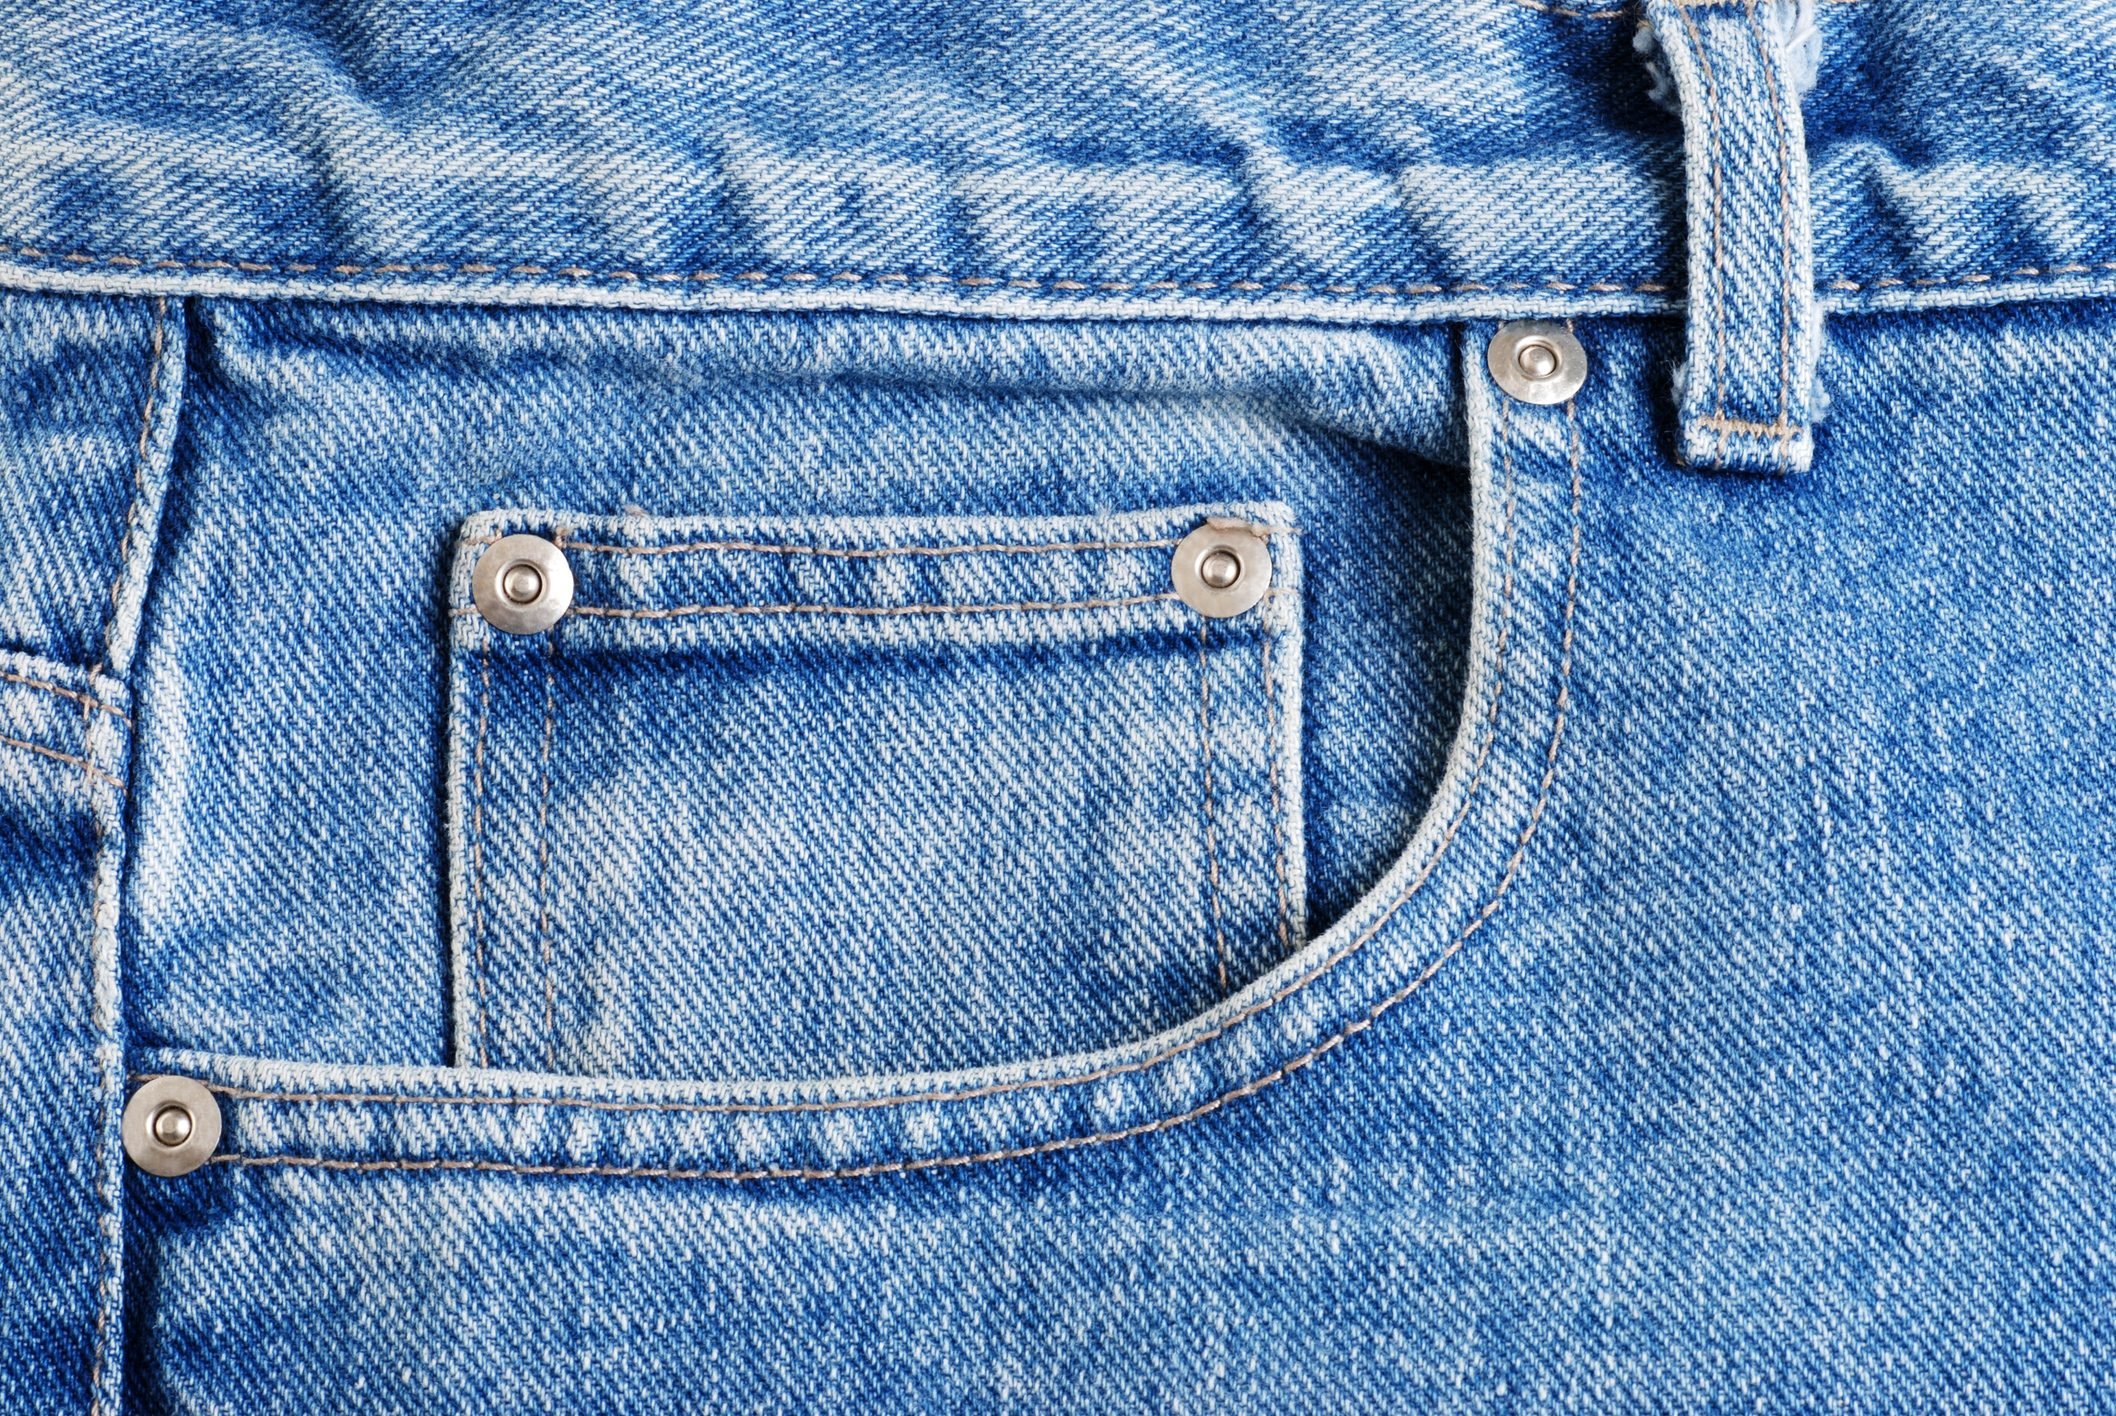 Why Jeans Have Those Tiny Pockets